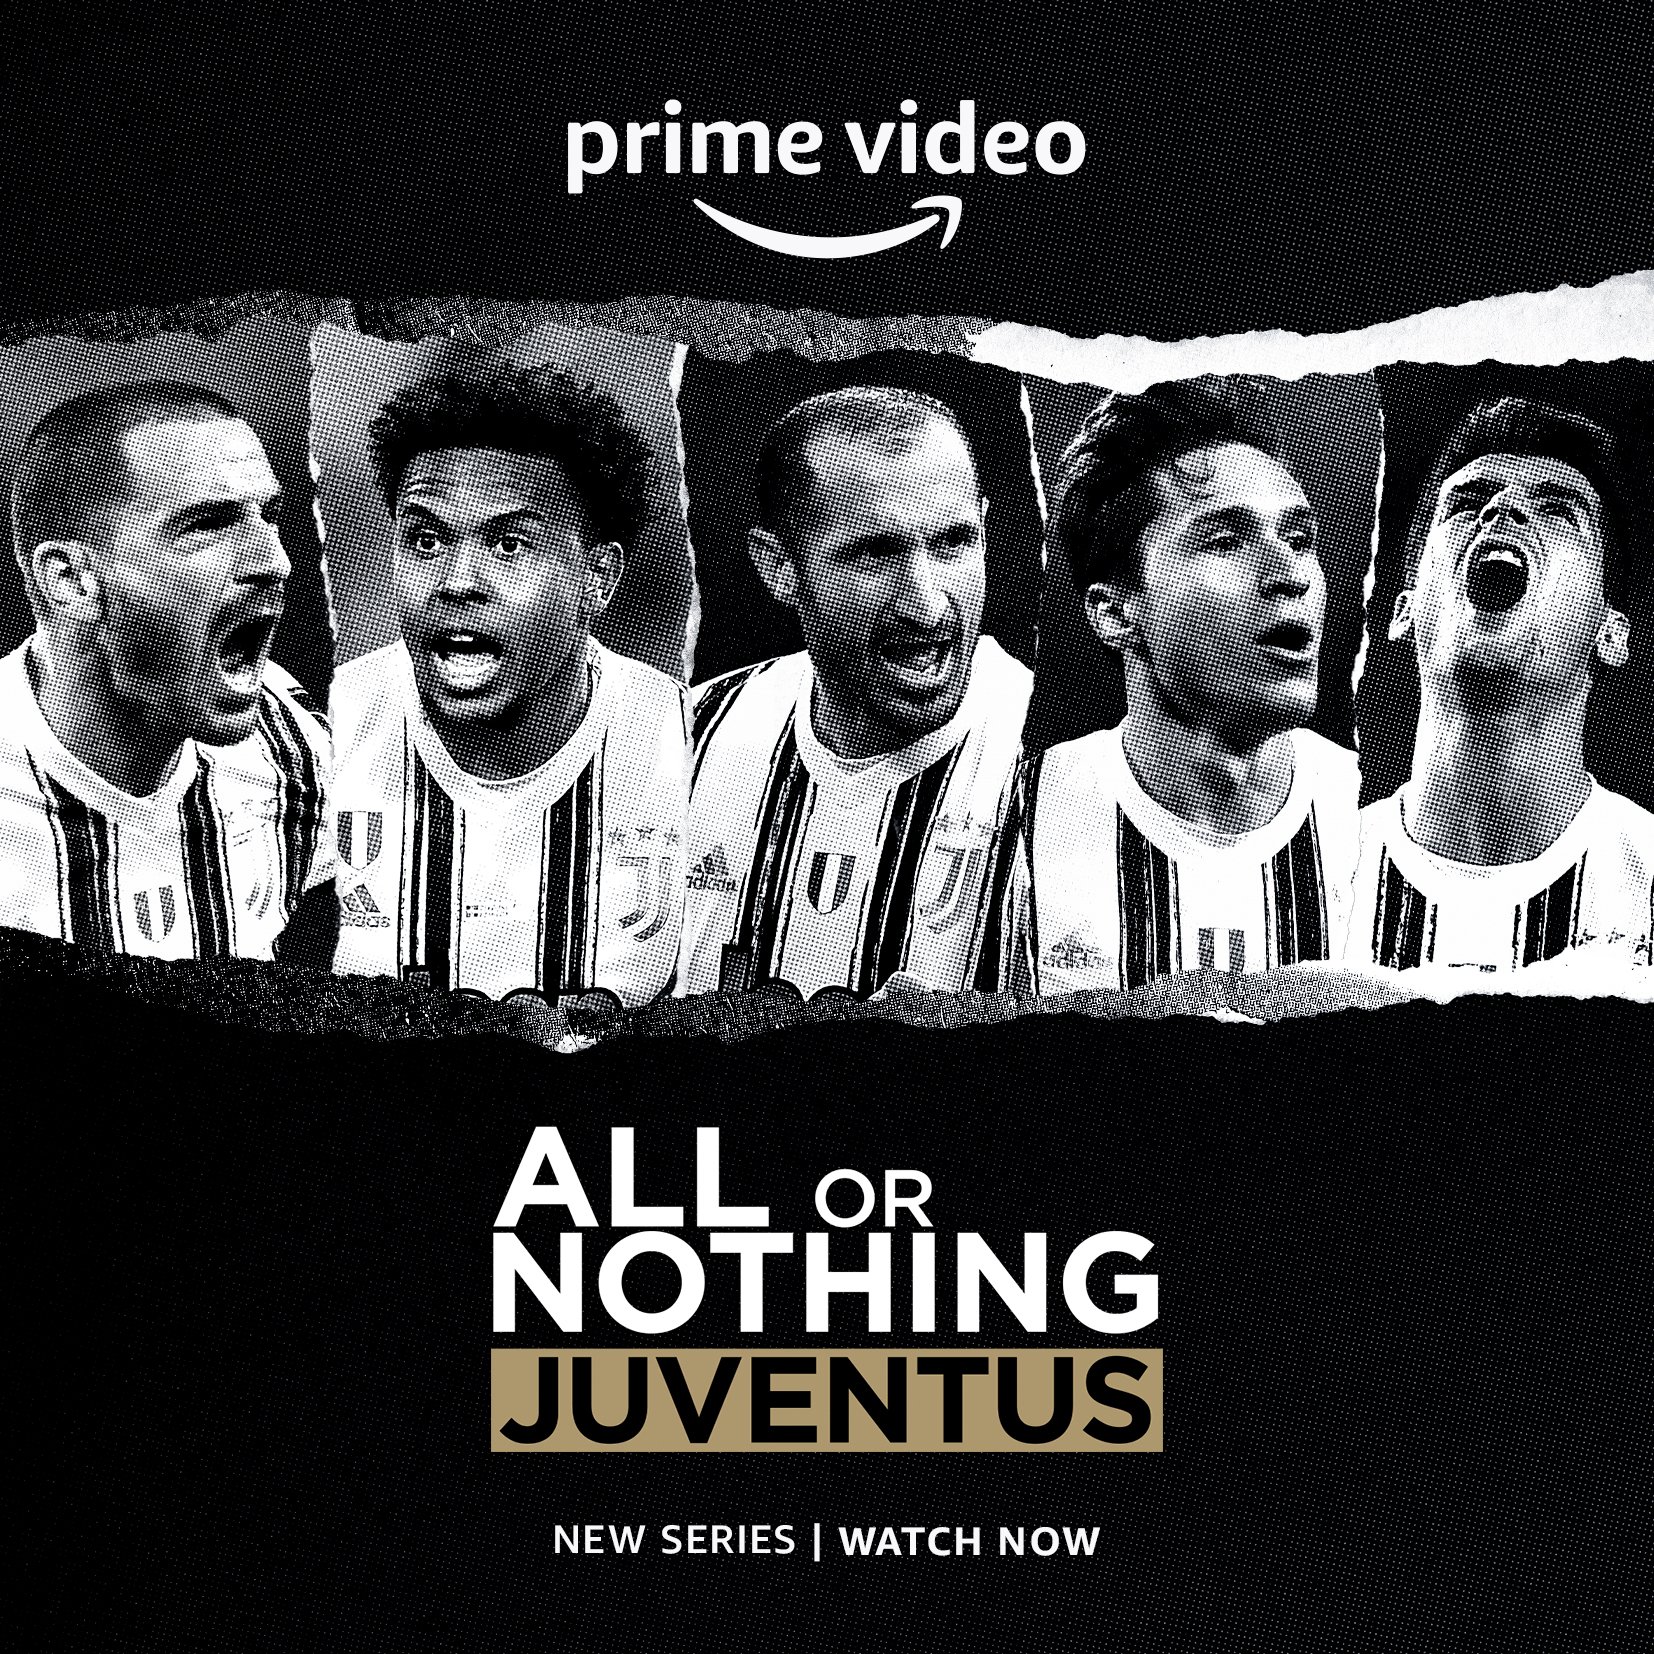 Prime Video: All or Nothing